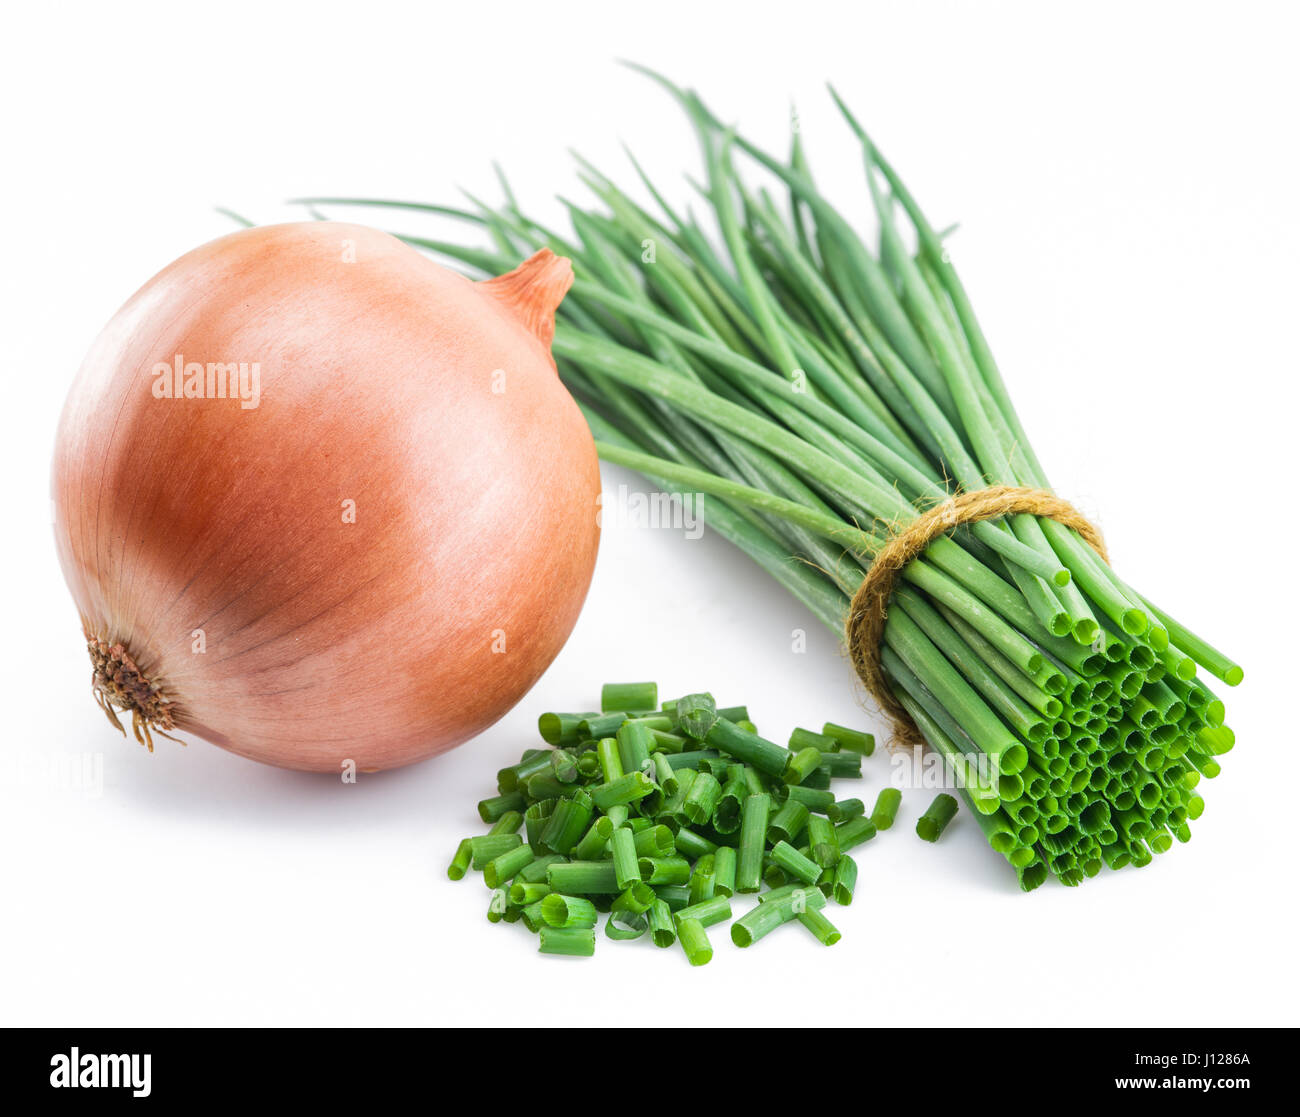 Vibrant Onion Garden Sprouted Green Stems Surrounding A Yellow Bulb On A  Rustic Wooden Background, Farm Food, Vegetable Farm, Vegetable Garden  Background Image And Wallpaper for Free Download